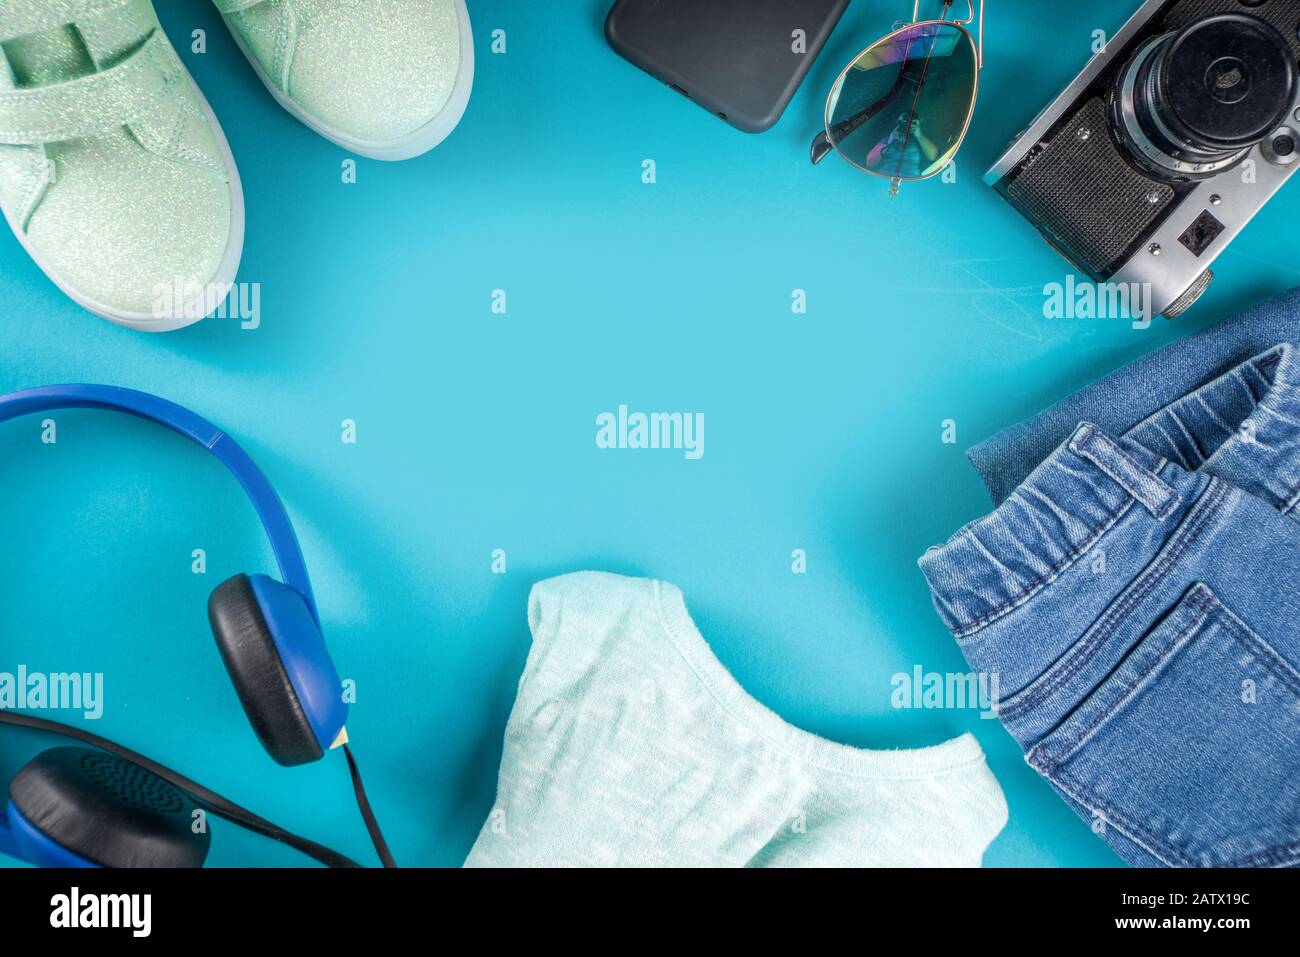 Stylish female spring autumn outfit and accessories on turquoise blue background, flat lay. Trendy girls clothes flatlay copy space top view Stock Photo